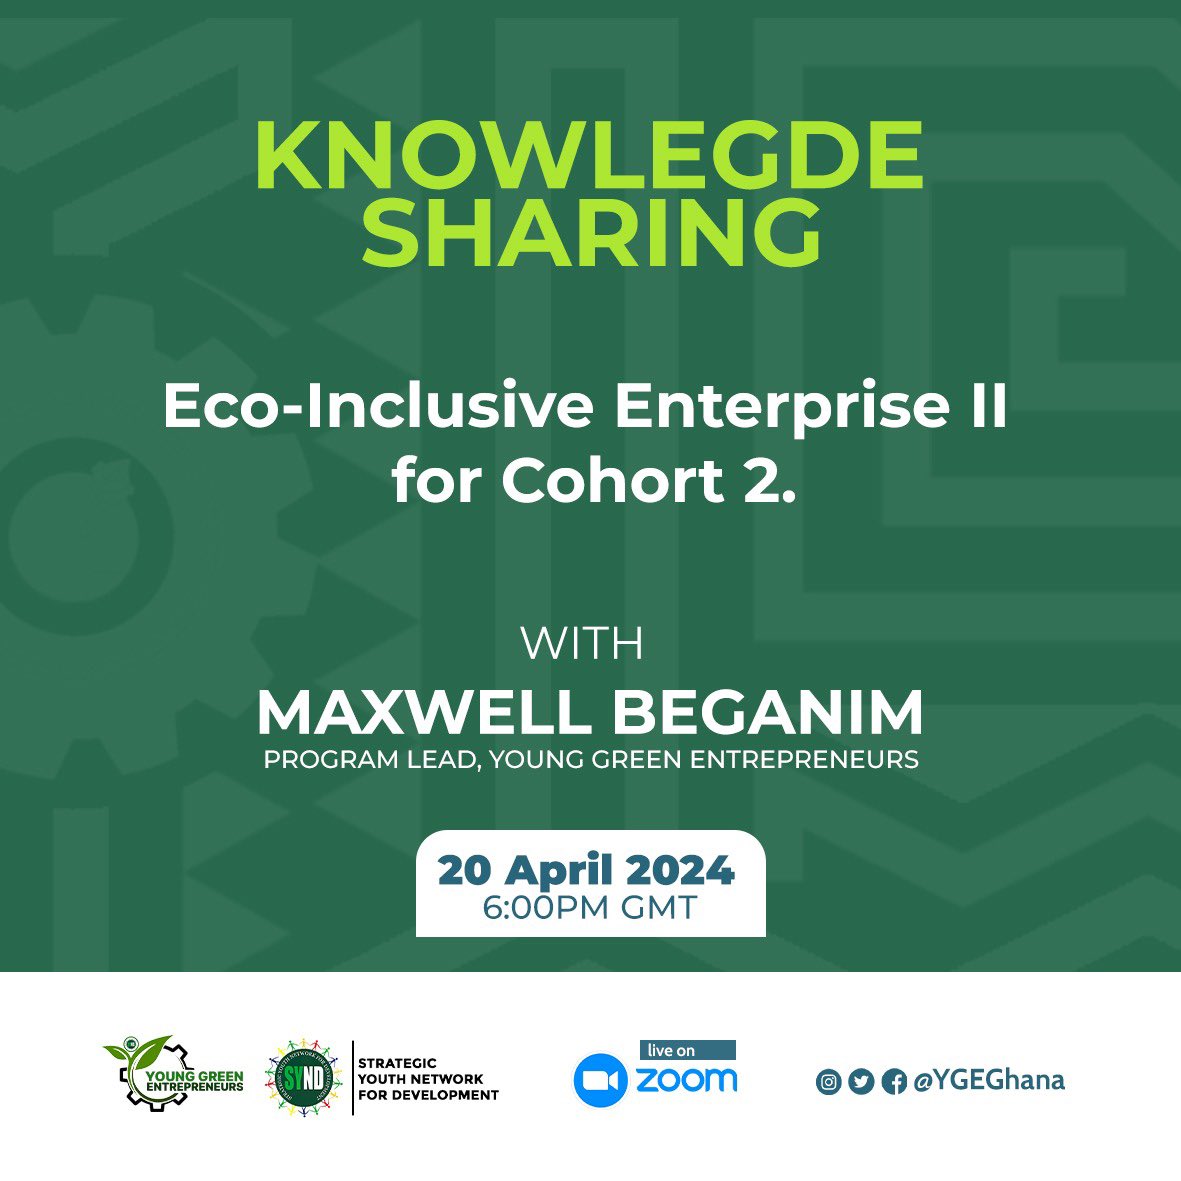 Join us for this exciting Knowledge Sharing meeting on Eco Inclusive Enterprise. #GreenInnovation #SYNDGhana #ClimateAction